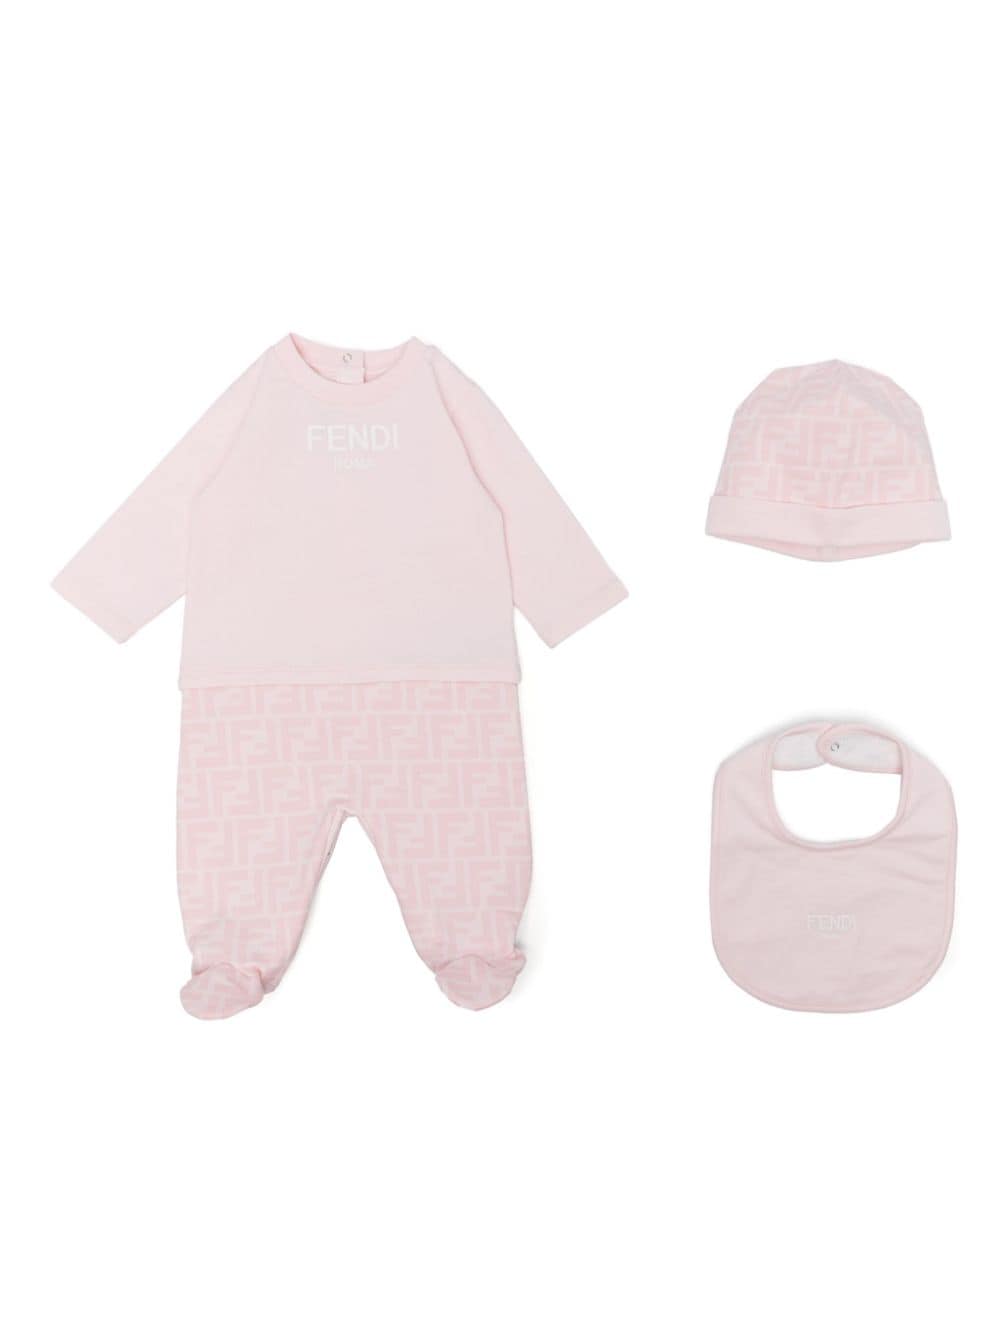 Pink baby girl onesie with logo